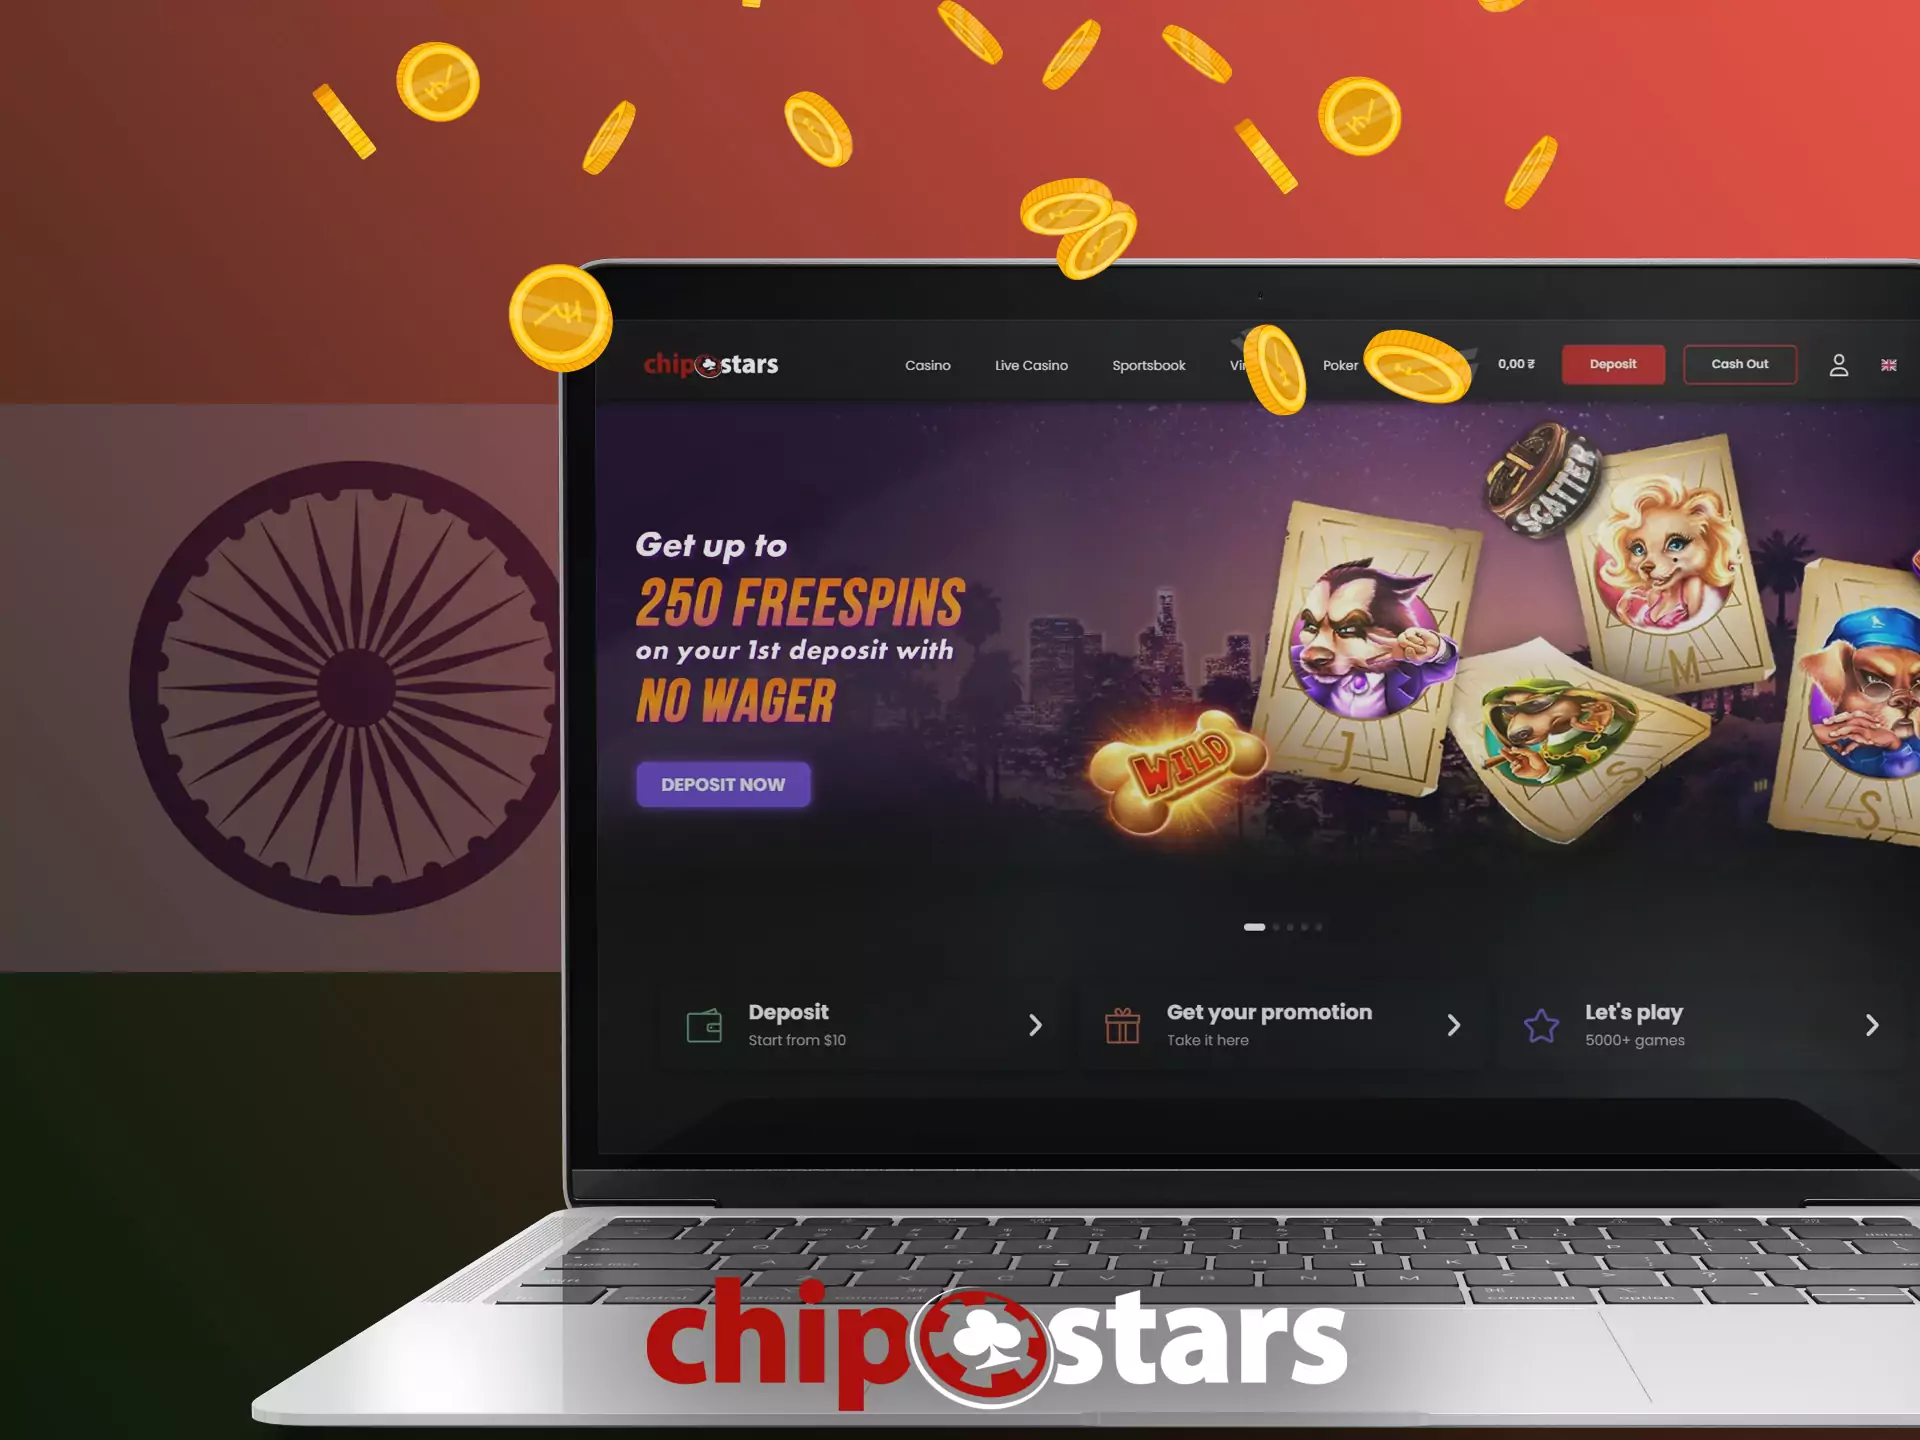 Chipstars accepts INR currency and allows the usage of Indian payment methods.